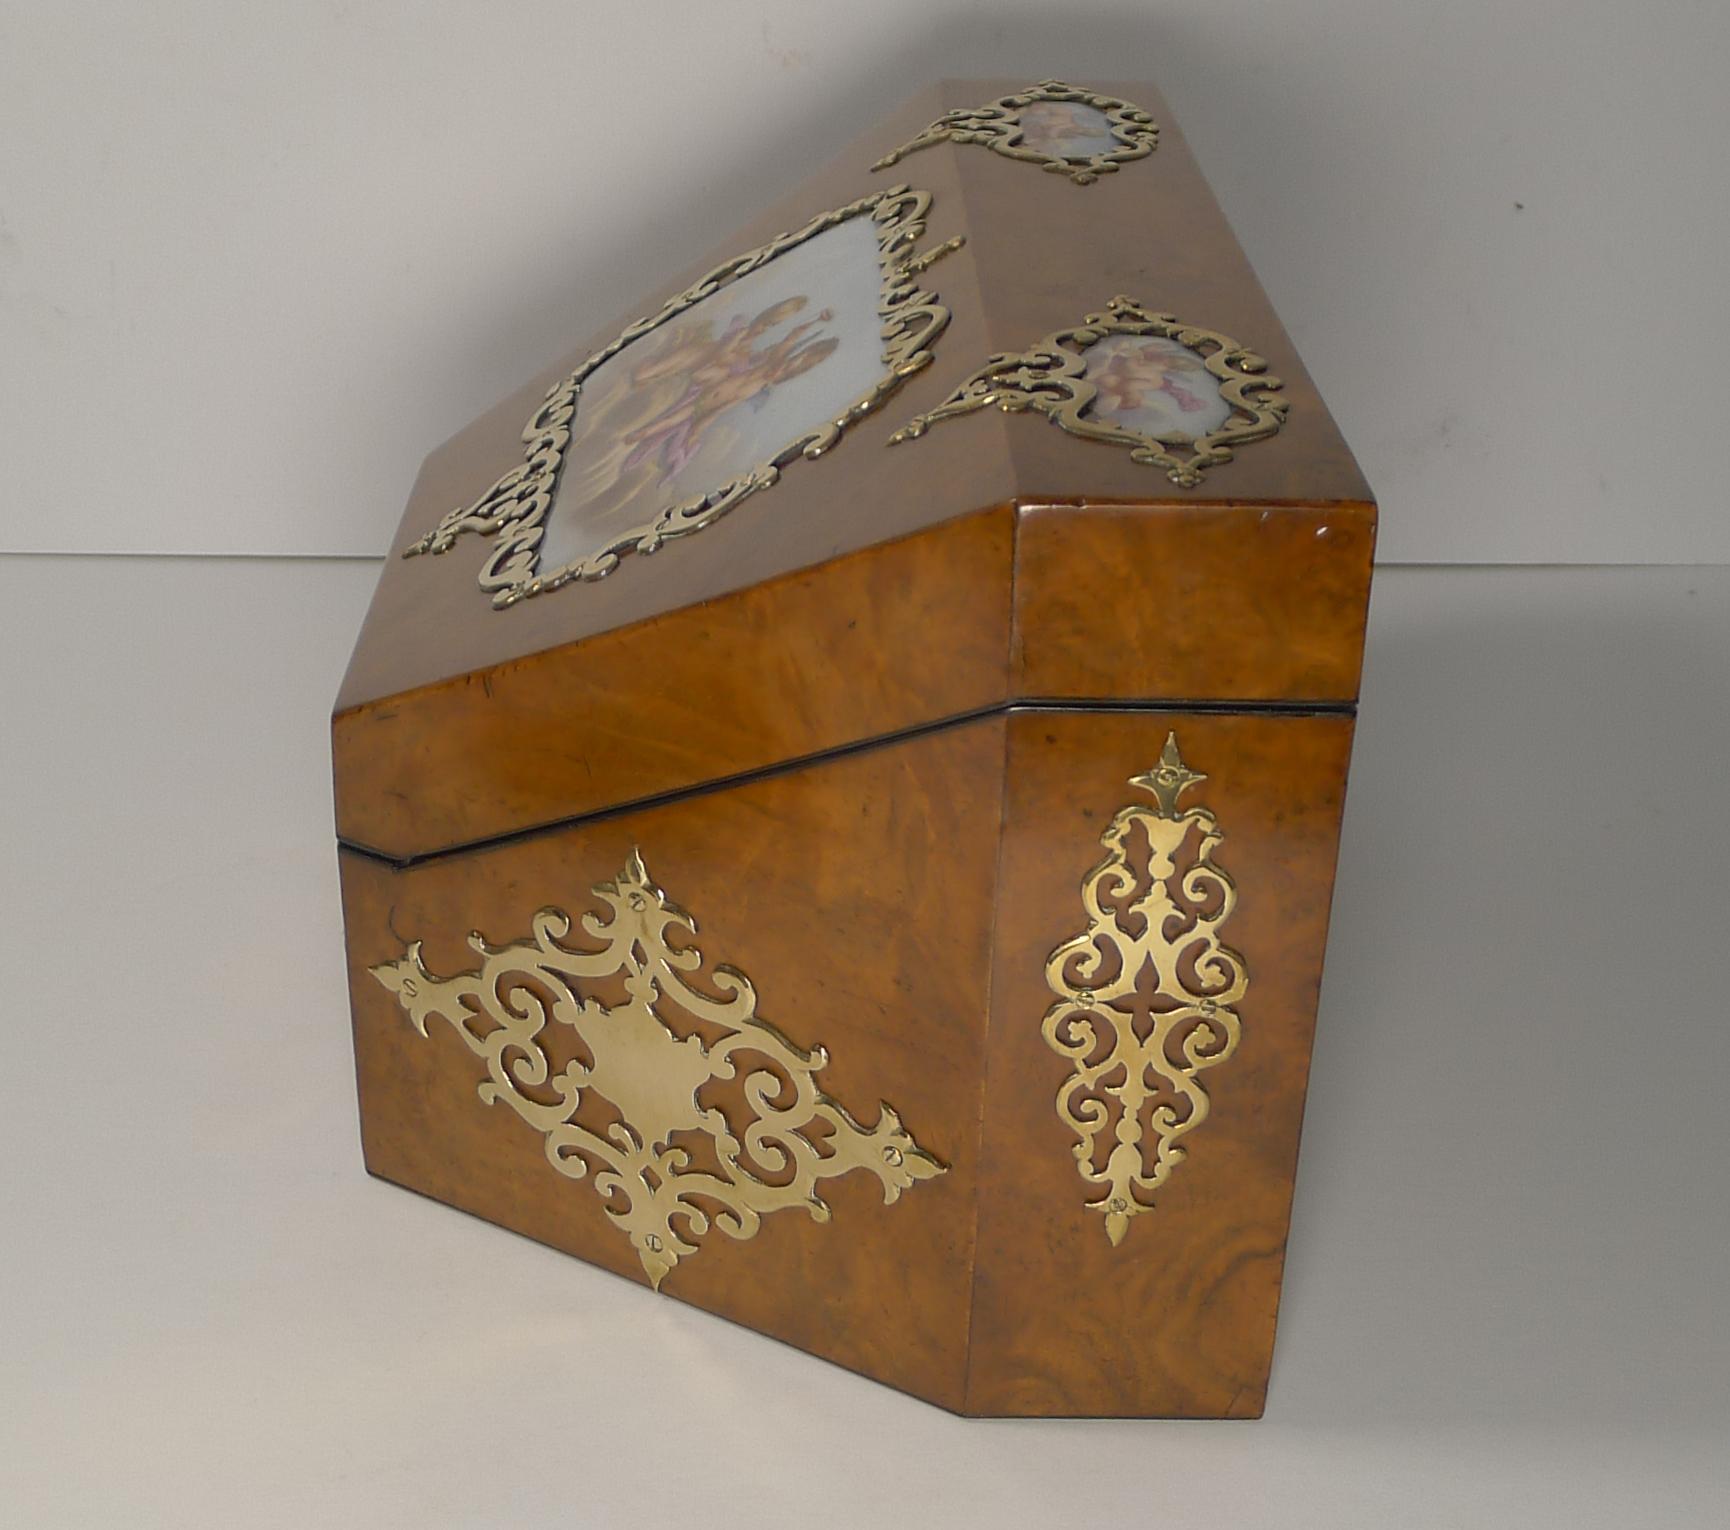 Antique English Burr Walnut & Hand Painted Porcelain Stationery Box, circa 1850 For Sale 1